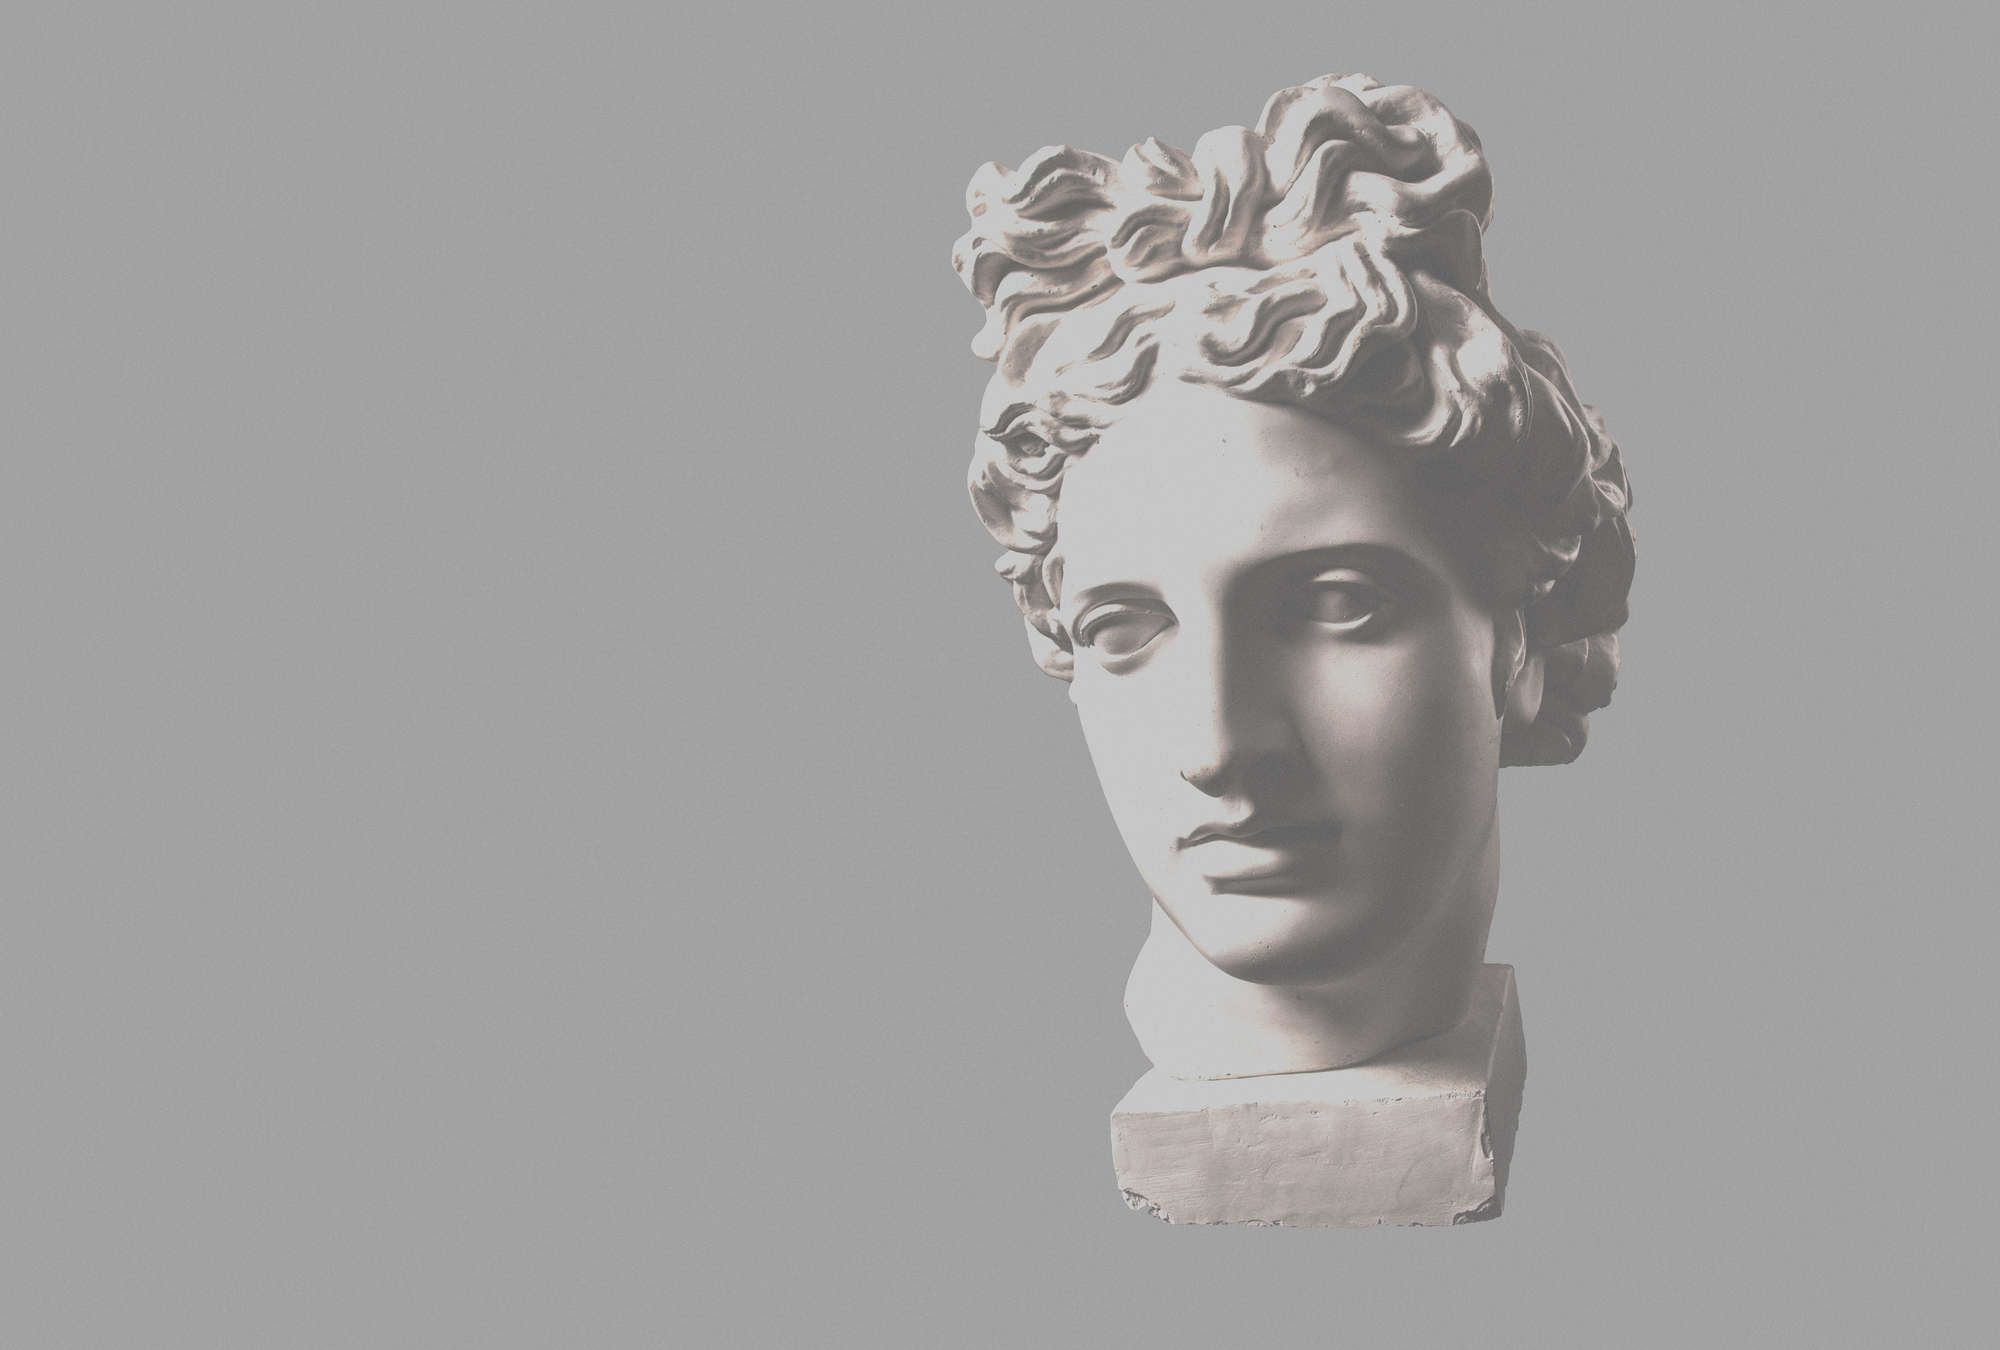             Photo wallpaper »venus« - antique female bust - Lightly textured non-woven fabric
        